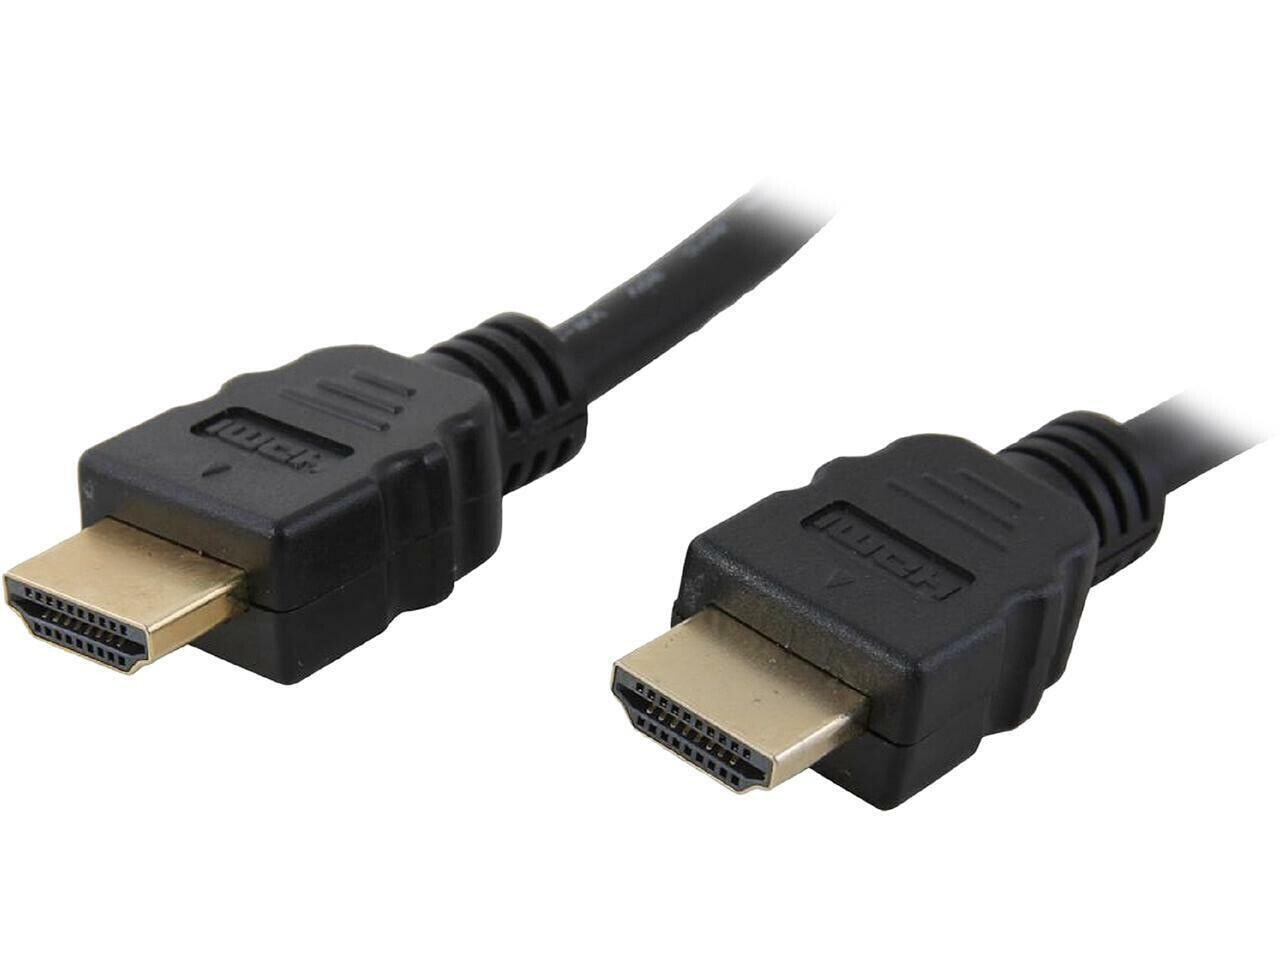 Nippon Labs HDMI-HS-10-2P 10 ft. HDMI 2.0 Cable, High-Speed HDTV Cable, Supports